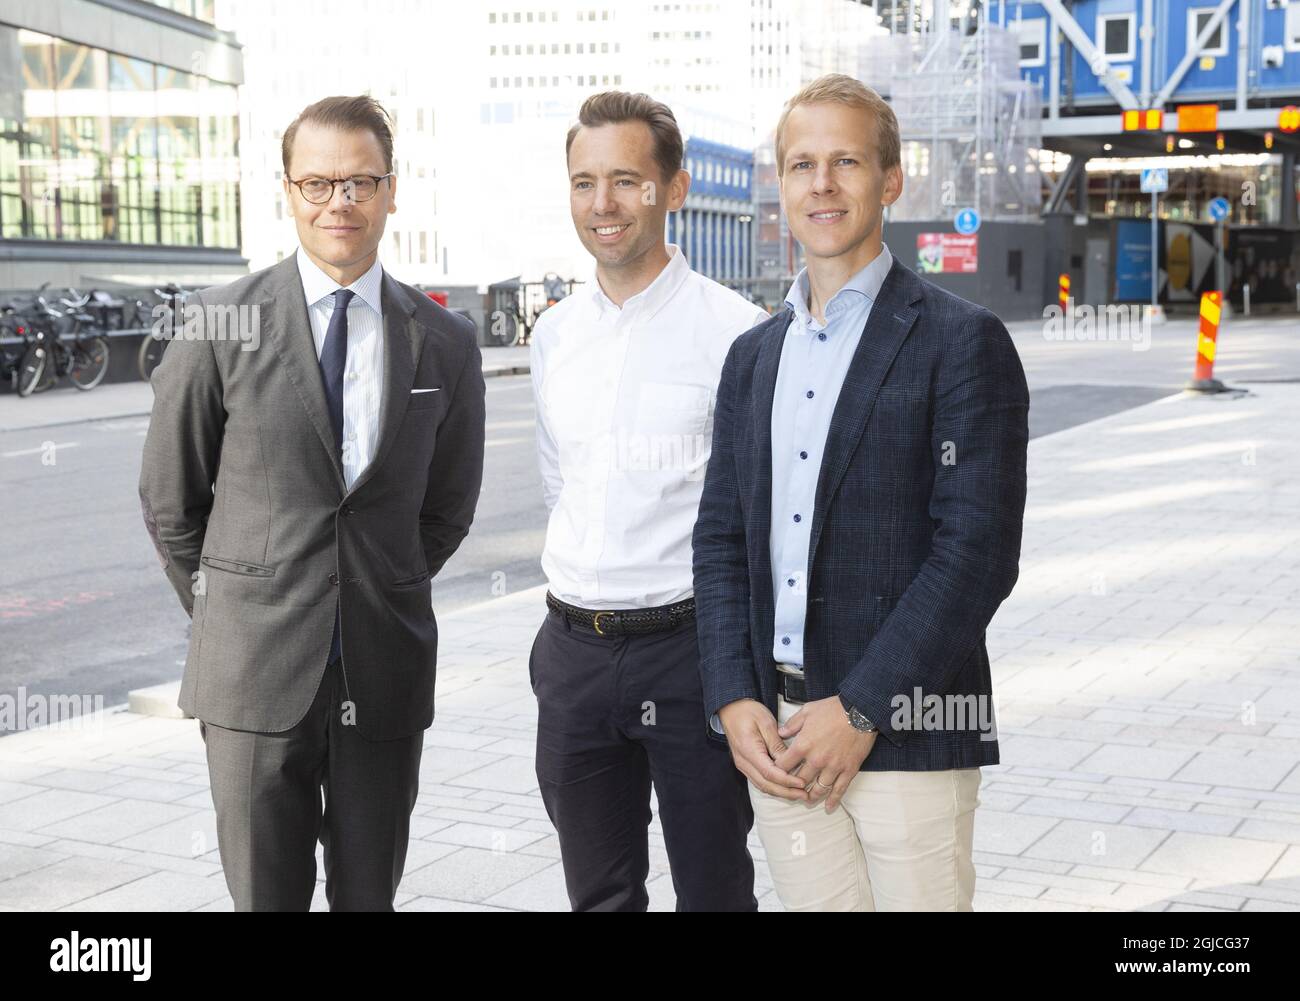 Prince Daniel is welcomed by Oscar Sehlberg Westergard och Anders  Hammarback to his visit to the start-up company Antler in Stockholm,  Tuesday, September 3, 2019 Photo Johan Jeppsson / TT Kod 2551